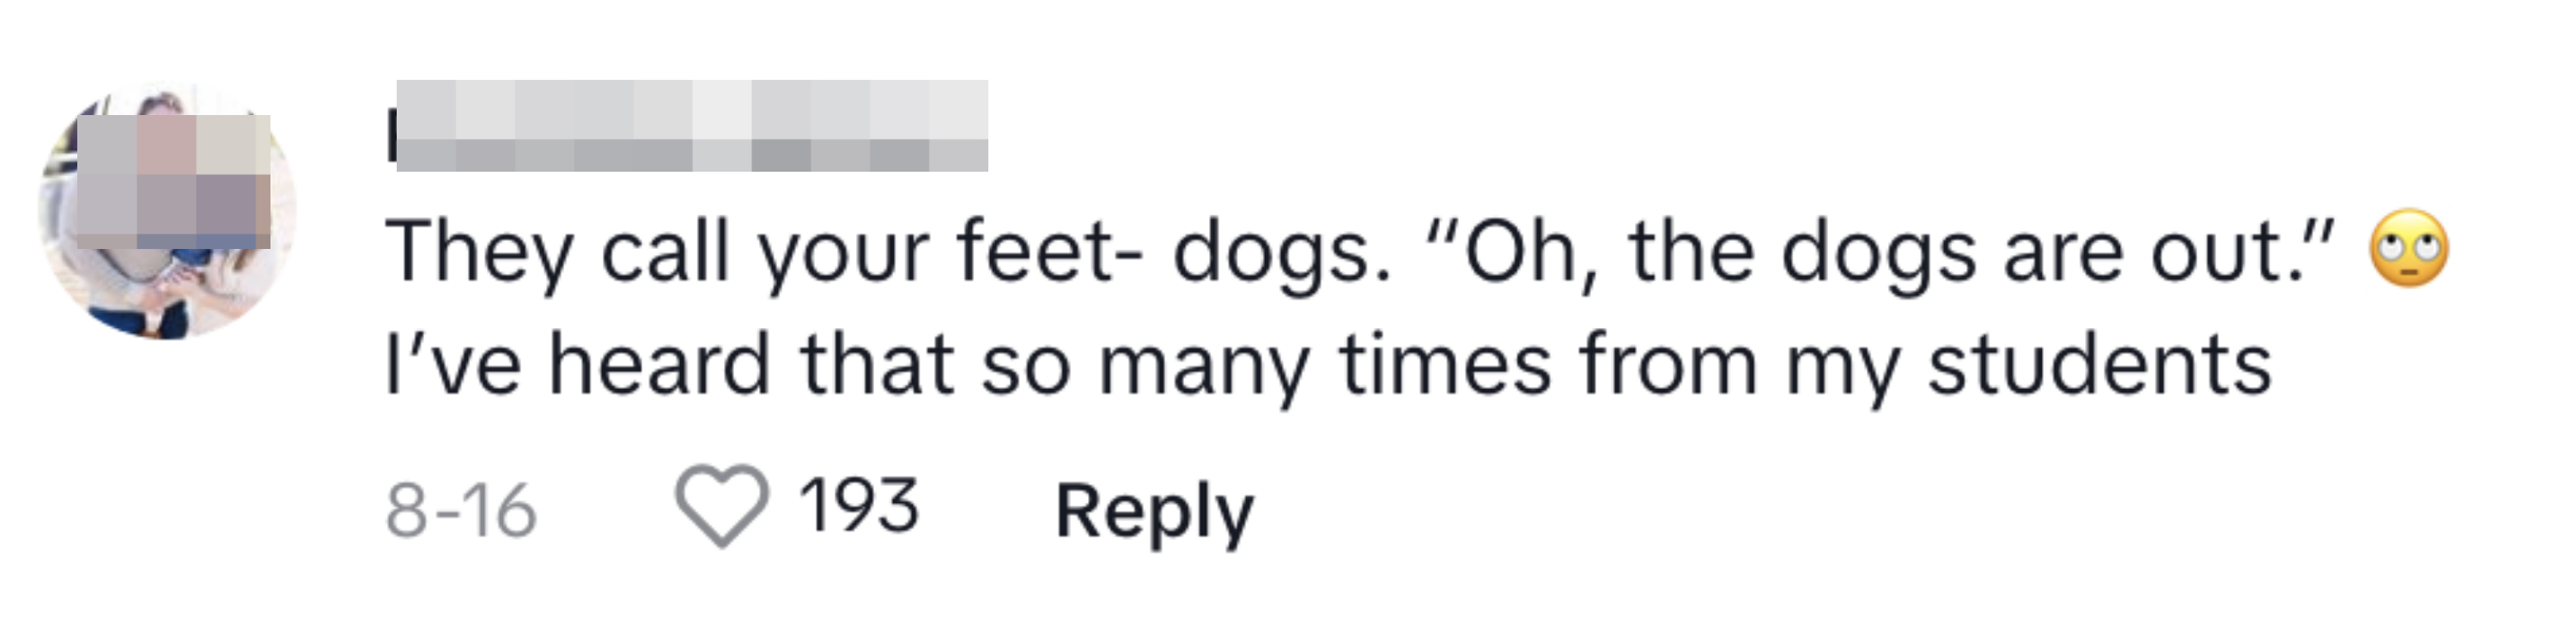 Commenter explaining how her students say &quot;Oh the dogs are out&quot; when people are wearing open-toed shoes